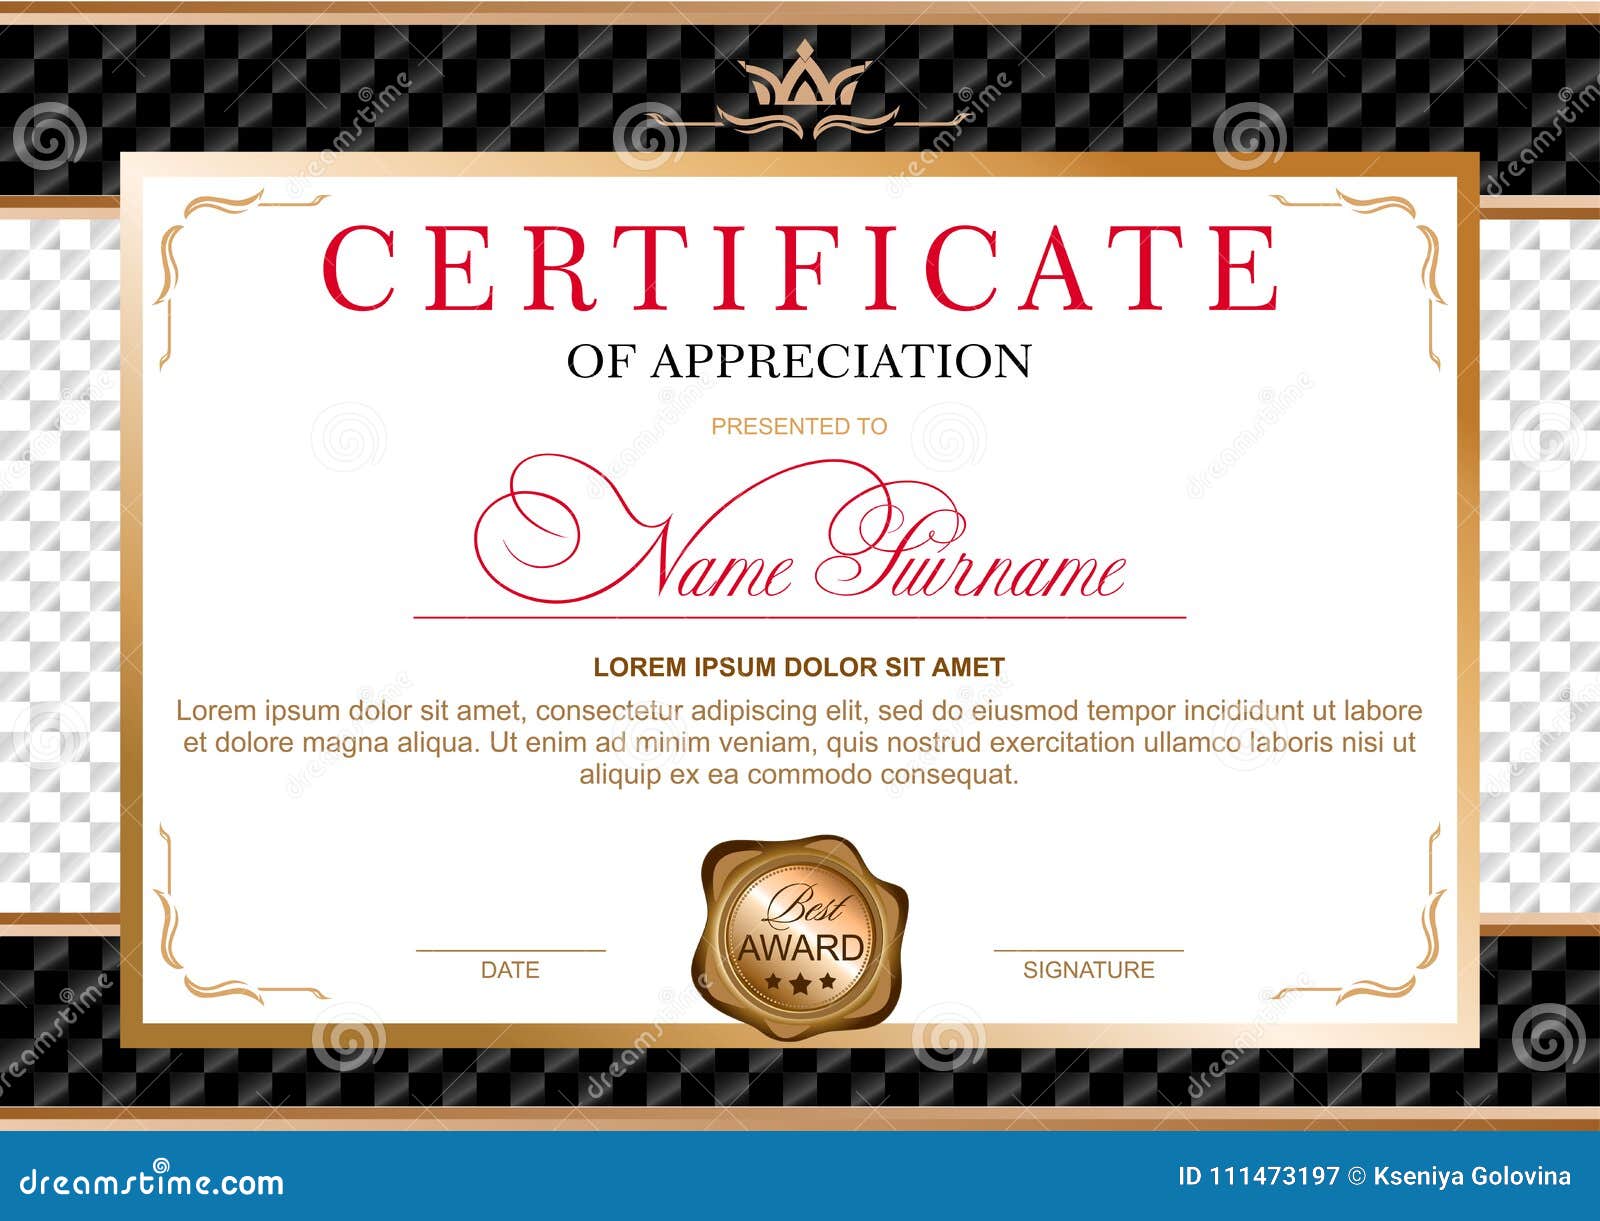 Certificate in the Official Solemn Elegant Royal Style Stock Vector